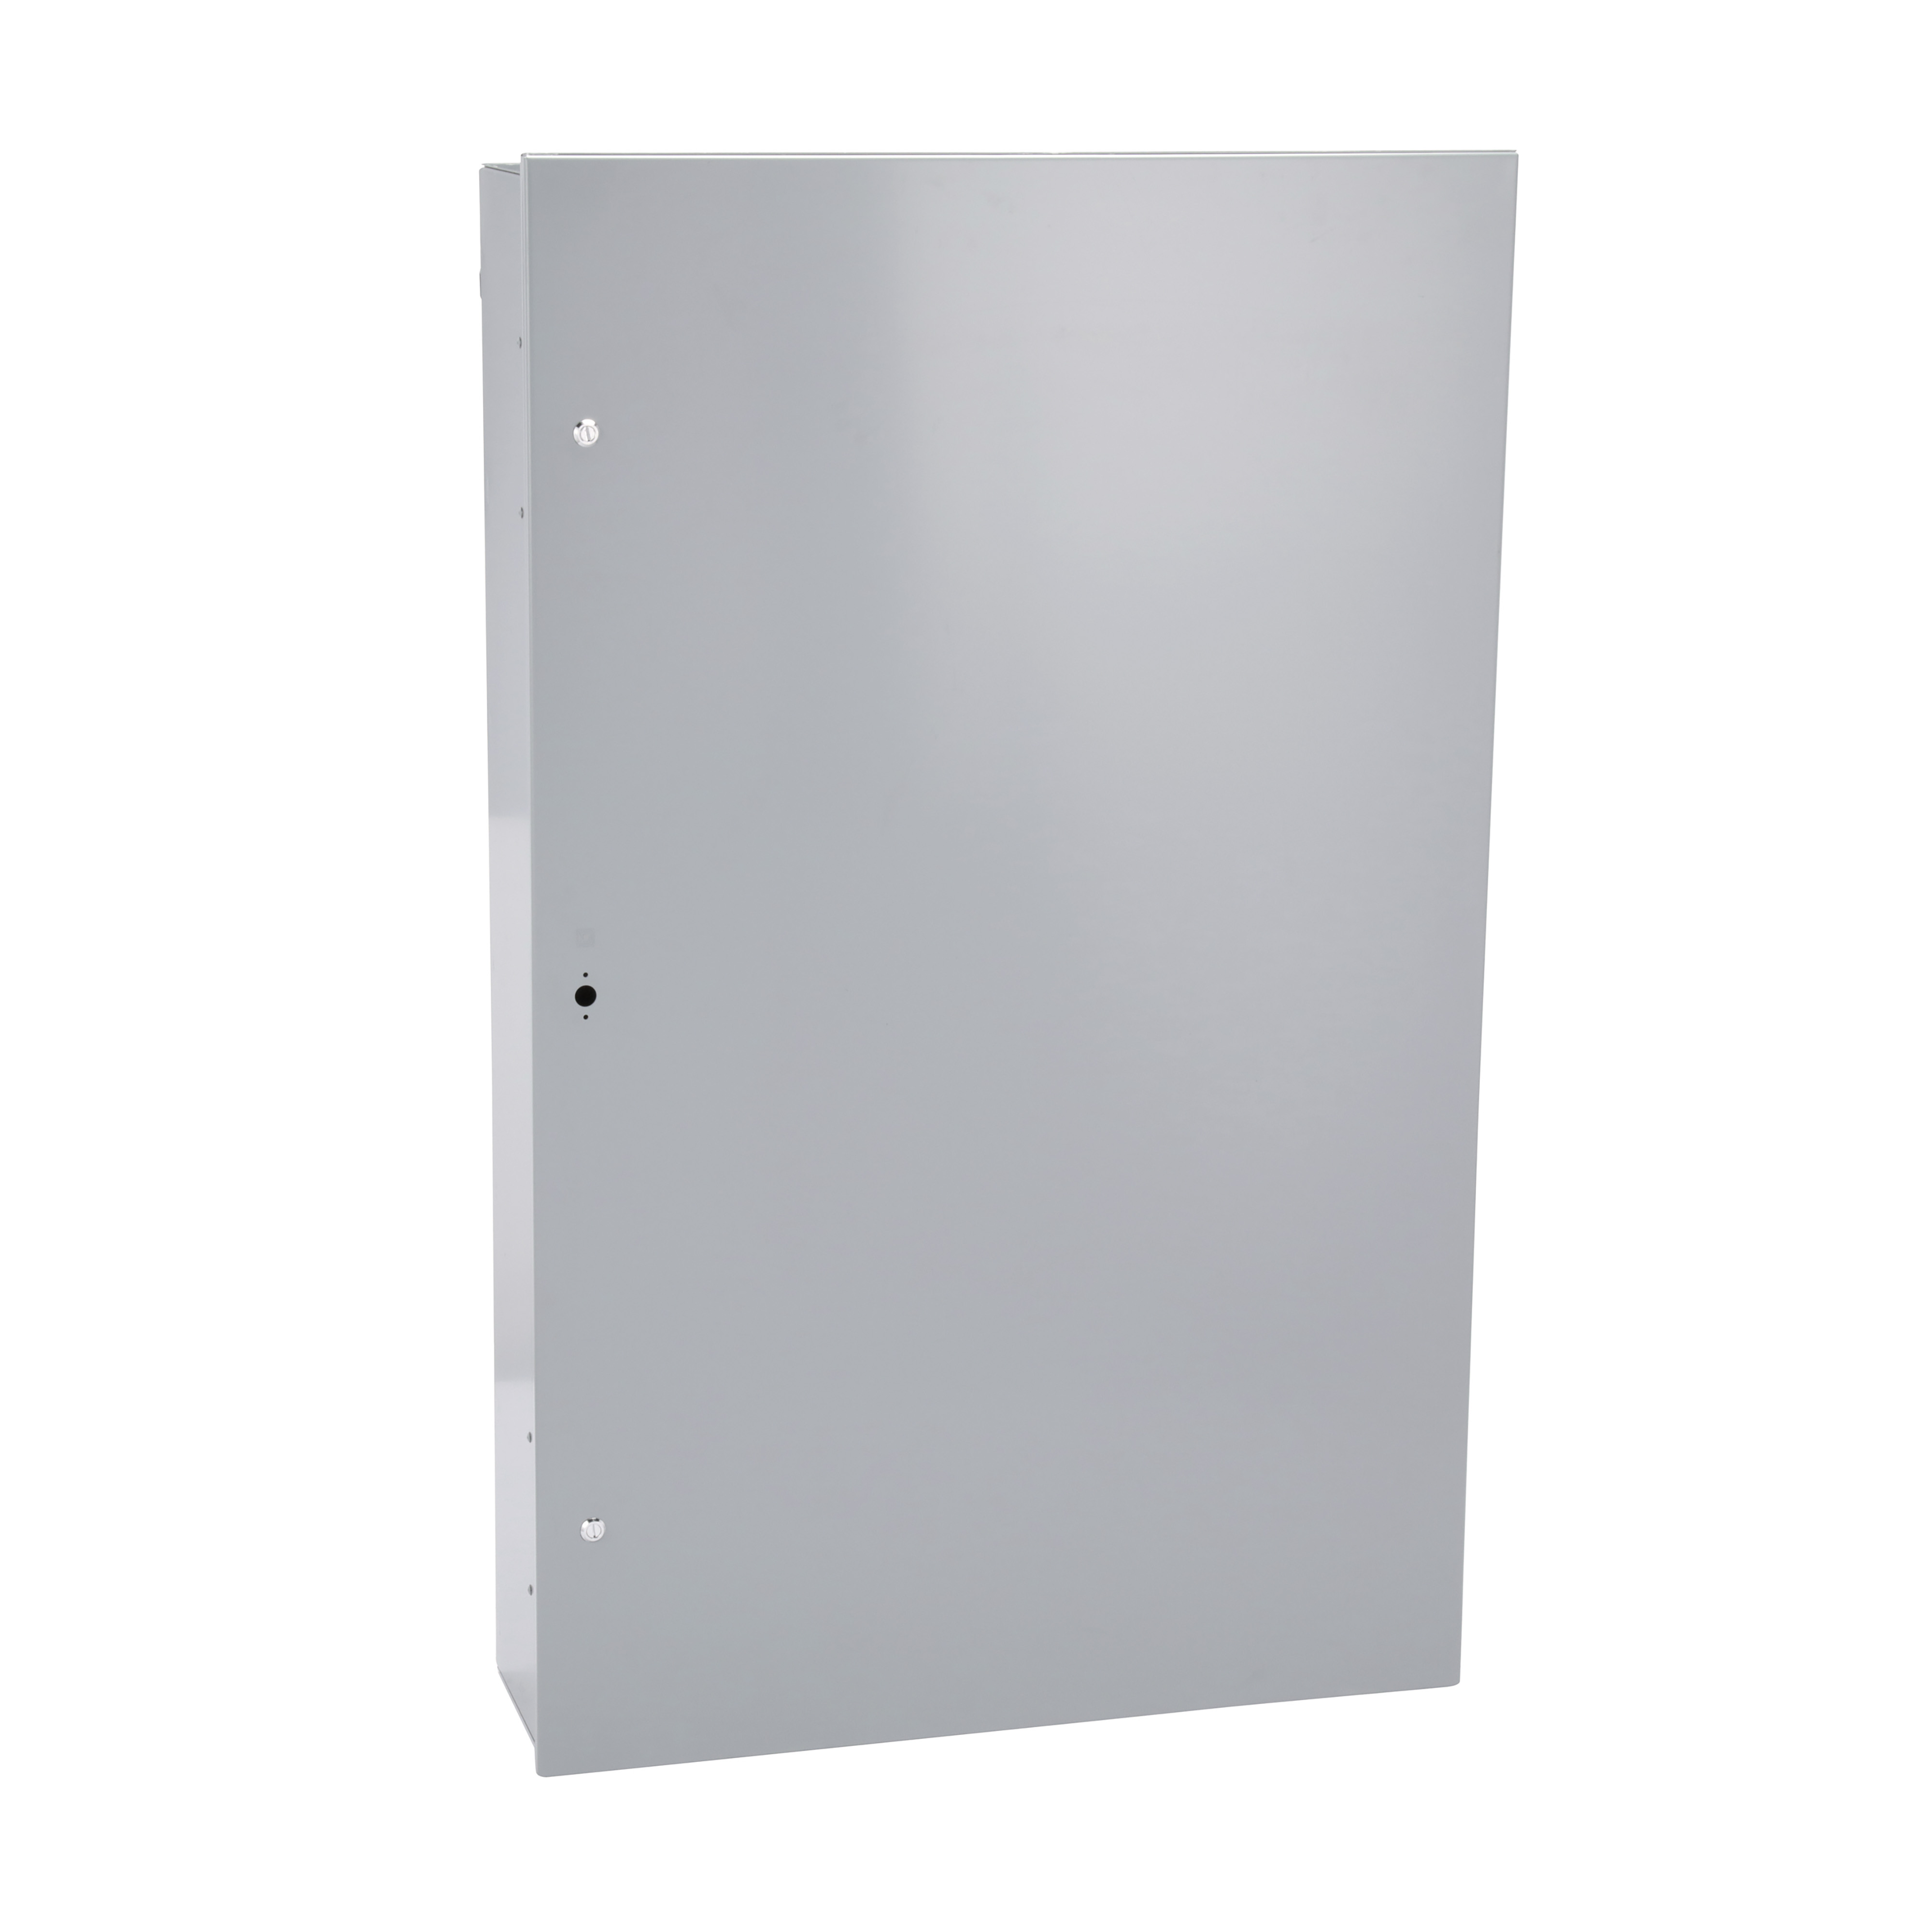 Box, I-Line Panelboard, HCJ, 32in W x 73in H x 9.5in D, Type 3R/5/12, w/front